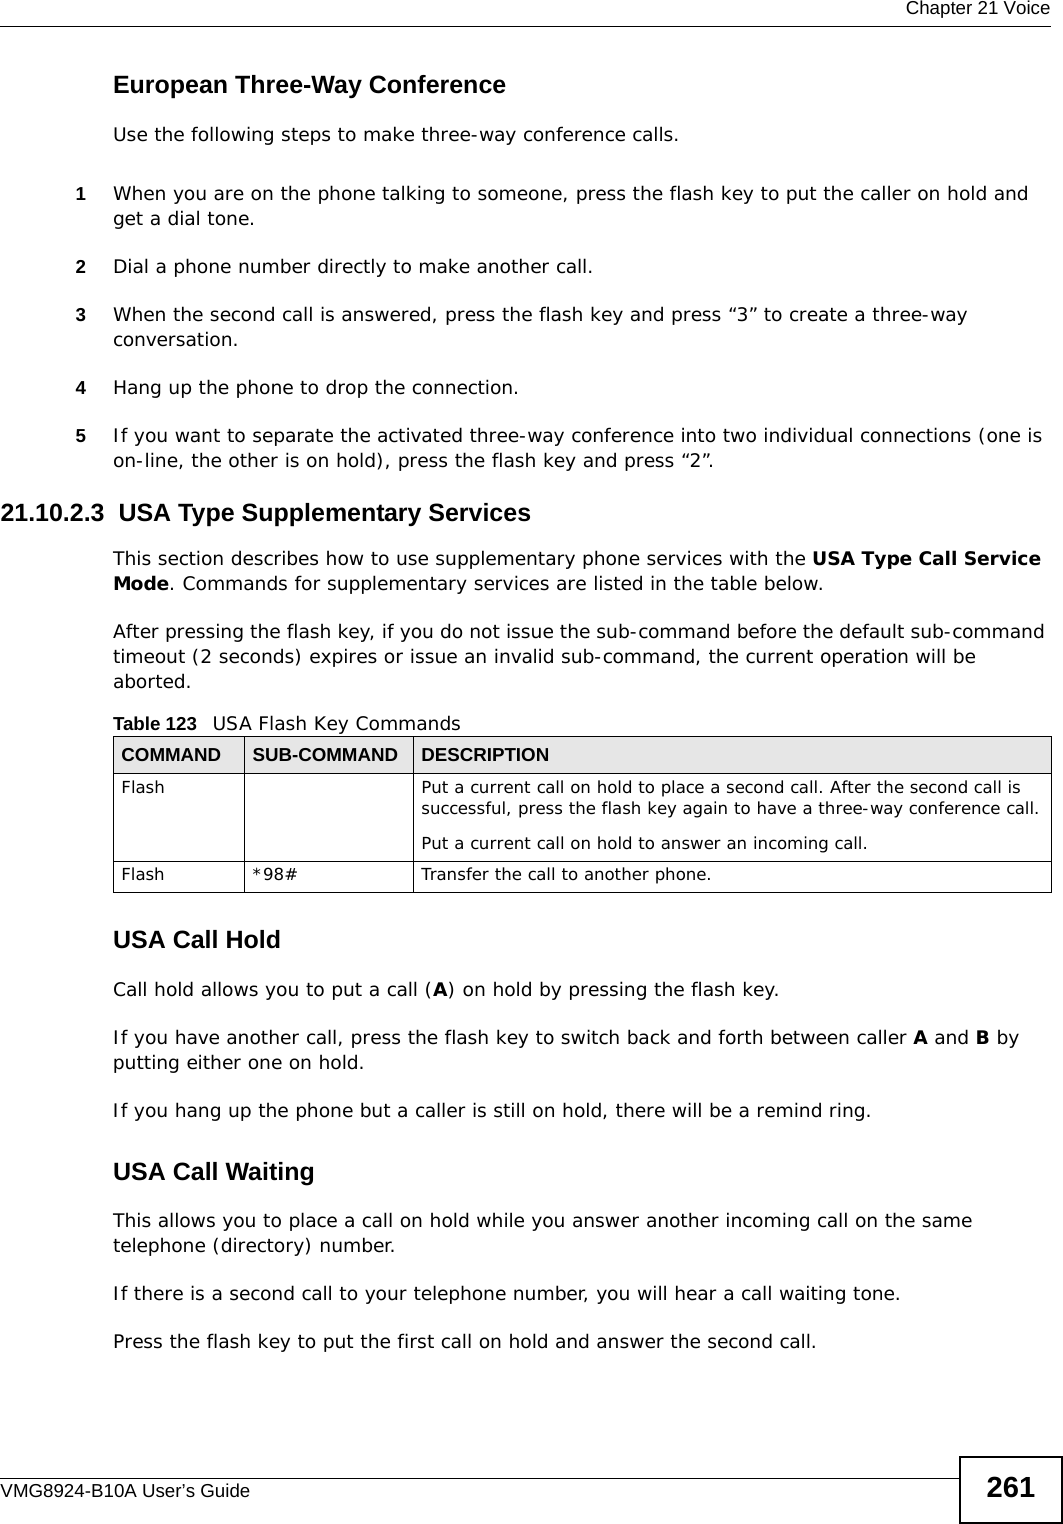  Chapter 21 VoiceVMG8924-B10A User’s Guide 261European Three-Way ConferenceUse the following steps to make three-way conference calls.1When you are on the phone talking to someone, press the flash key to put the caller on hold and get a dial tone. 2Dial a phone number directly to make another call.3When the second call is answered, press the flash key and press “3” to create a three-way conversation.4Hang up the phone to drop the connection.5If you want to separate the activated three-way conference into two individual connections (one is on-line, the other is on hold), press the flash key and press “2”.21.10.2.3  USA Type Supplementary ServicesThis section describes how to use supplementary phone services with the USA Type Call Service Mode. Commands for supplementary services are listed in the table below.After pressing the flash key, if you do not issue the sub-command before the default sub-command timeout (2 seconds) expires or issue an invalid sub-command, the current operation will be aborted.USA Call HoldCall hold allows you to put a call (A) on hold by pressing the flash key. If you have another call, press the flash key to switch back and forth between caller A and B by putting either one on hold.If you hang up the phone but a caller is still on hold, there will be a remind ring.USA Call Waiting This allows you to place a call on hold while you answer another incoming call on the same telephone (directory) number. If there is a second call to your telephone number, you will hear a call waiting tone. Press the flash key to put the first call on hold and answer the second call.Table 123   USA Flash Key CommandsCOMMAND SUB-COMMAND DESCRIPTIONFlash  Put a current call on hold to place a second call. After the second call is successful, press the flash key again to have a three-way conference call.Put a current call on hold to answer an incoming call.Flash  *98# Transfer the call to another phone.